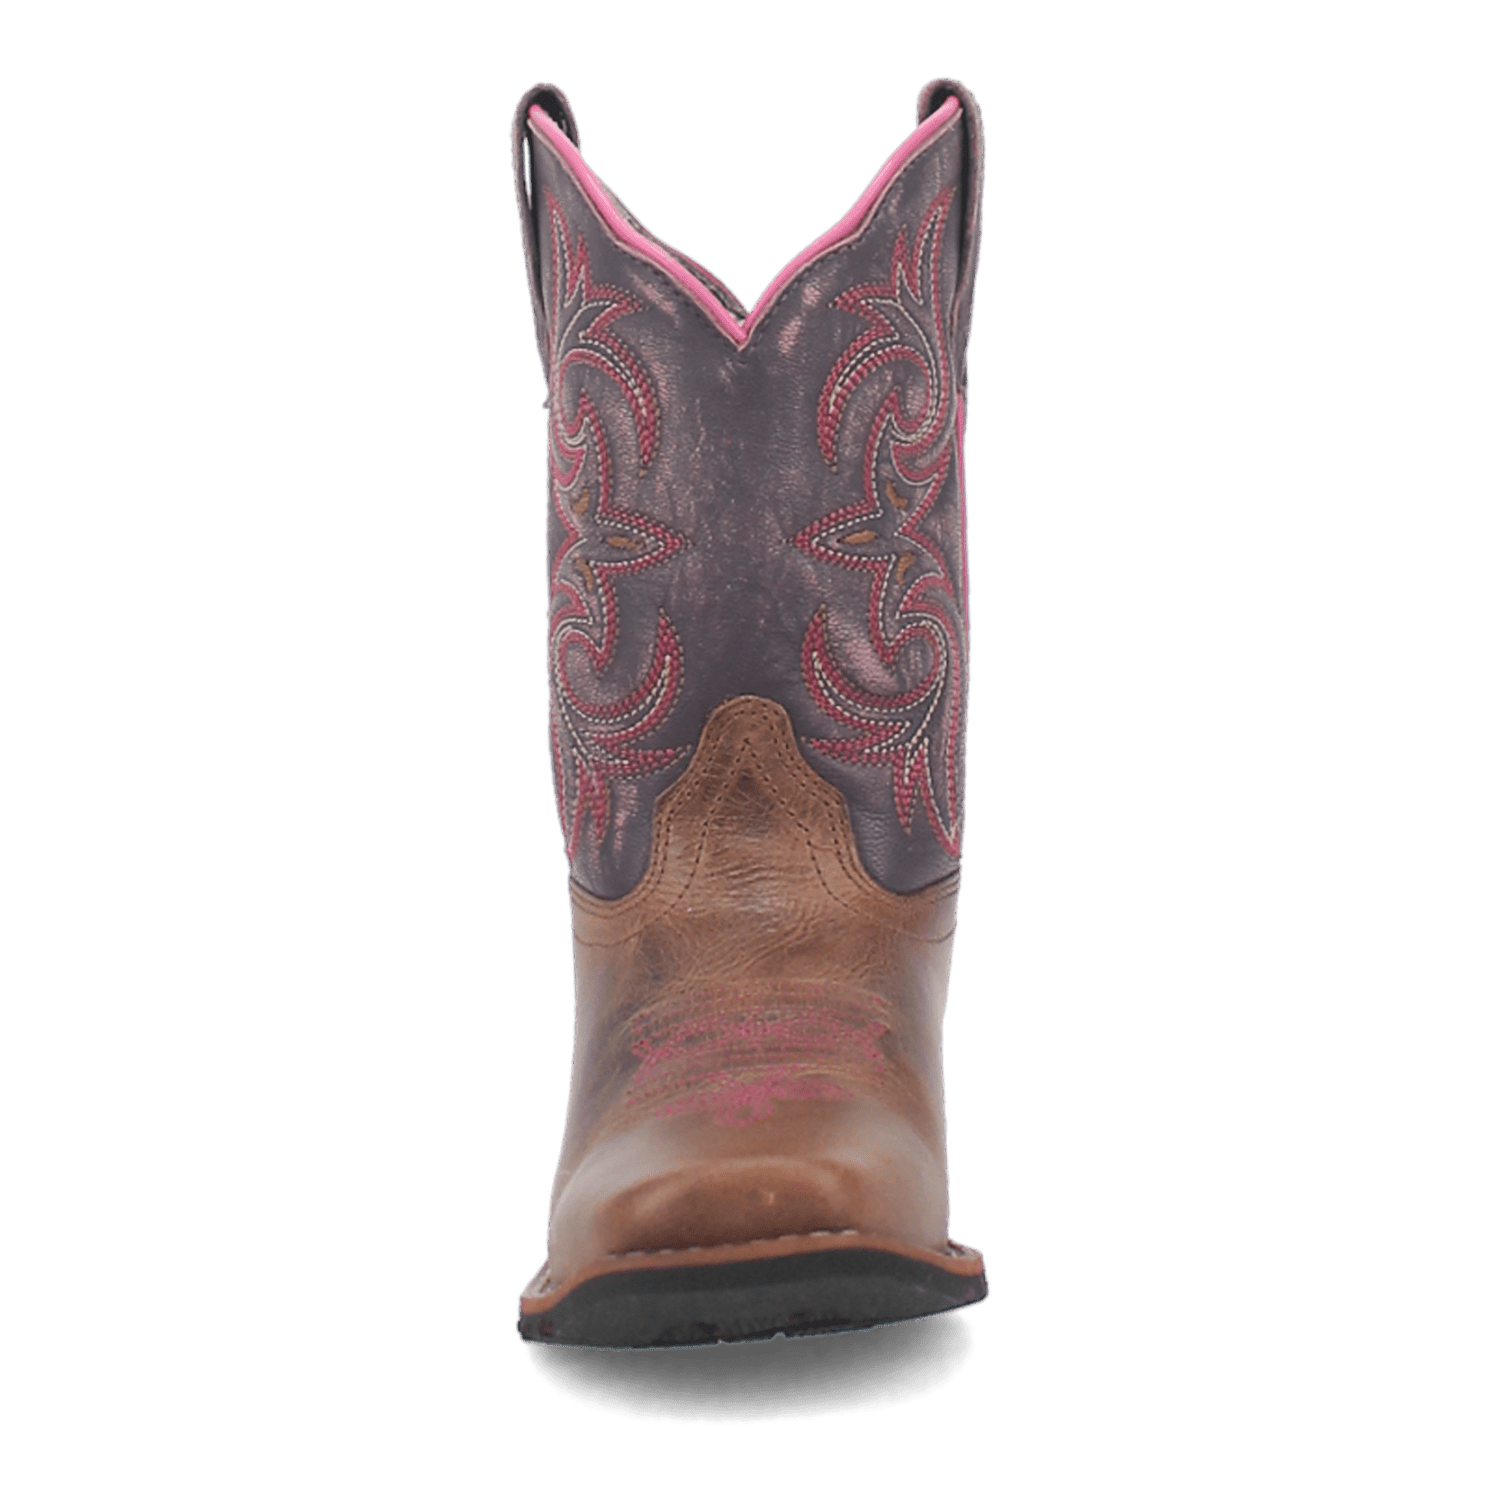 MAJESTY LEATHER CHILDREN'S BOOT Image